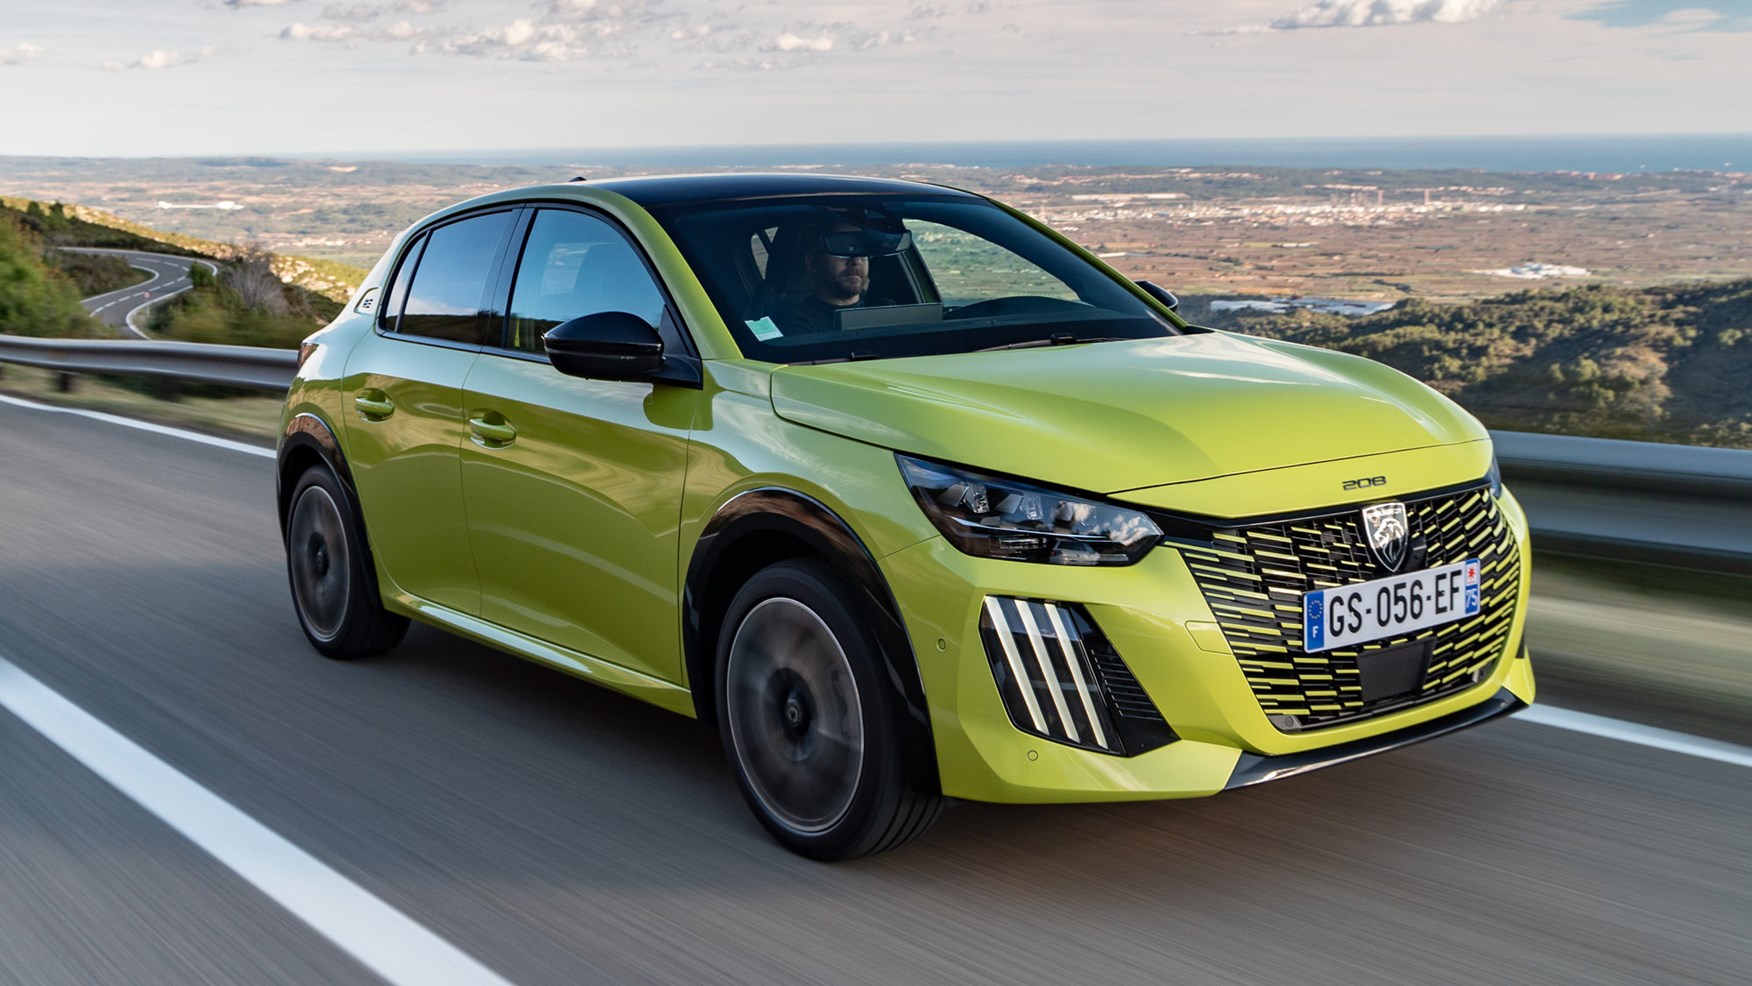 2024 Peugeot 208 Looks Even More Stylish And Has More Impressive Tech